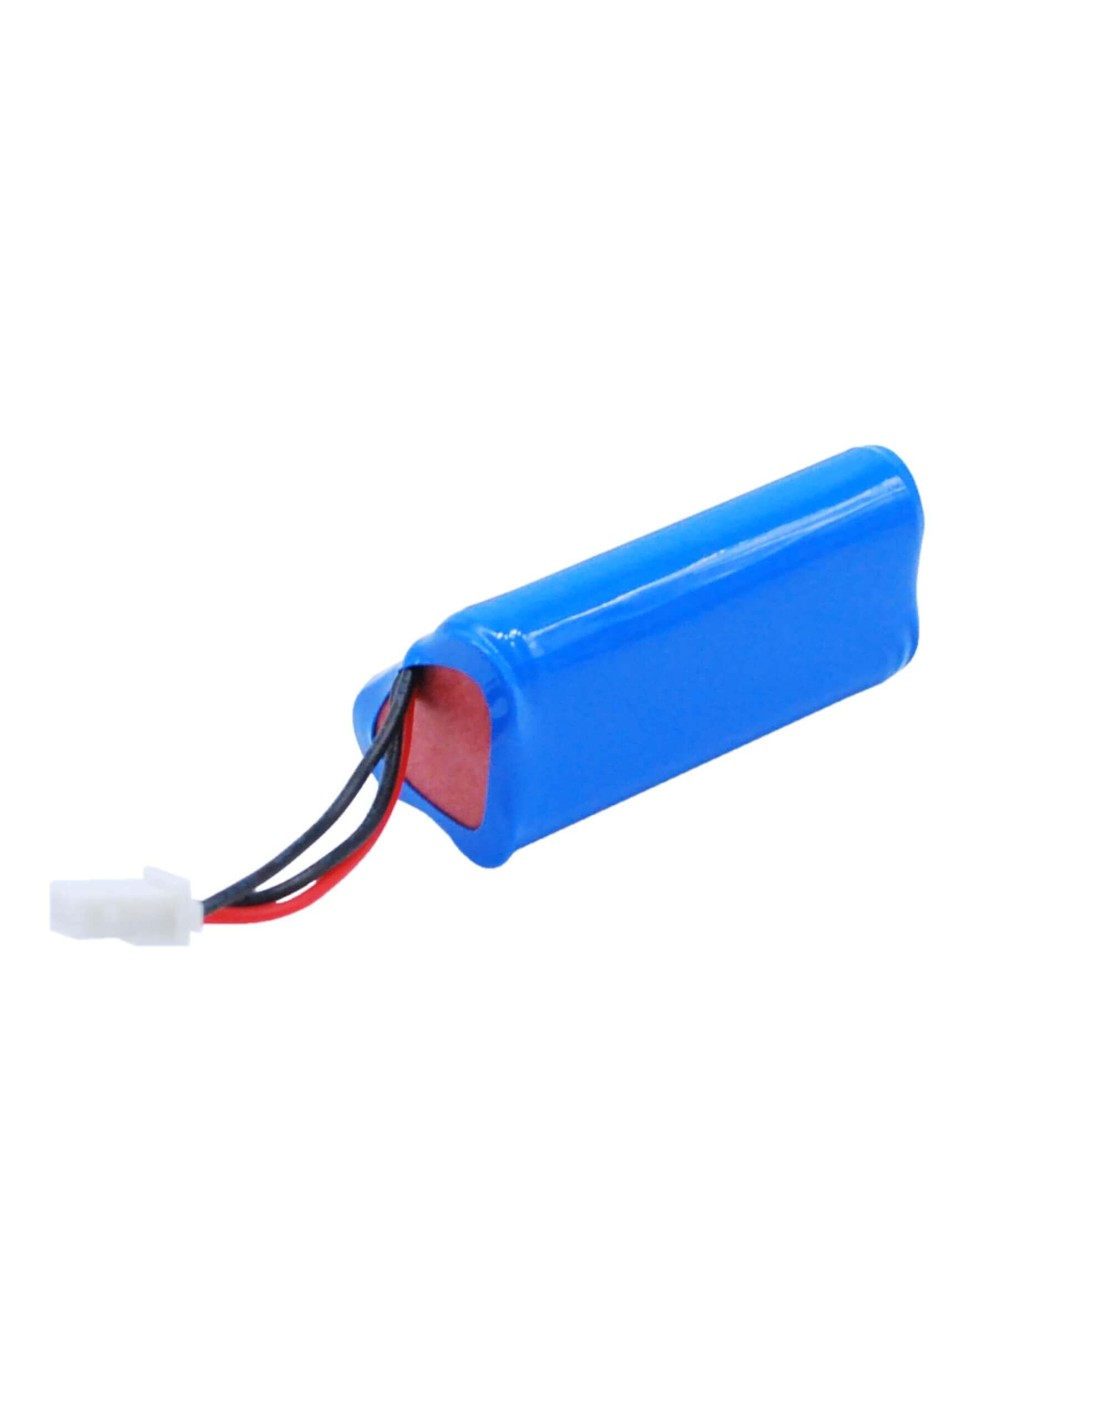 Battery for Drummond Scientific Portable Pipet-aid Xl, Portable Pipet-aid Xp2, Portable Pipet-aid Pk 3.6V, 700mAh - 2.52Wh